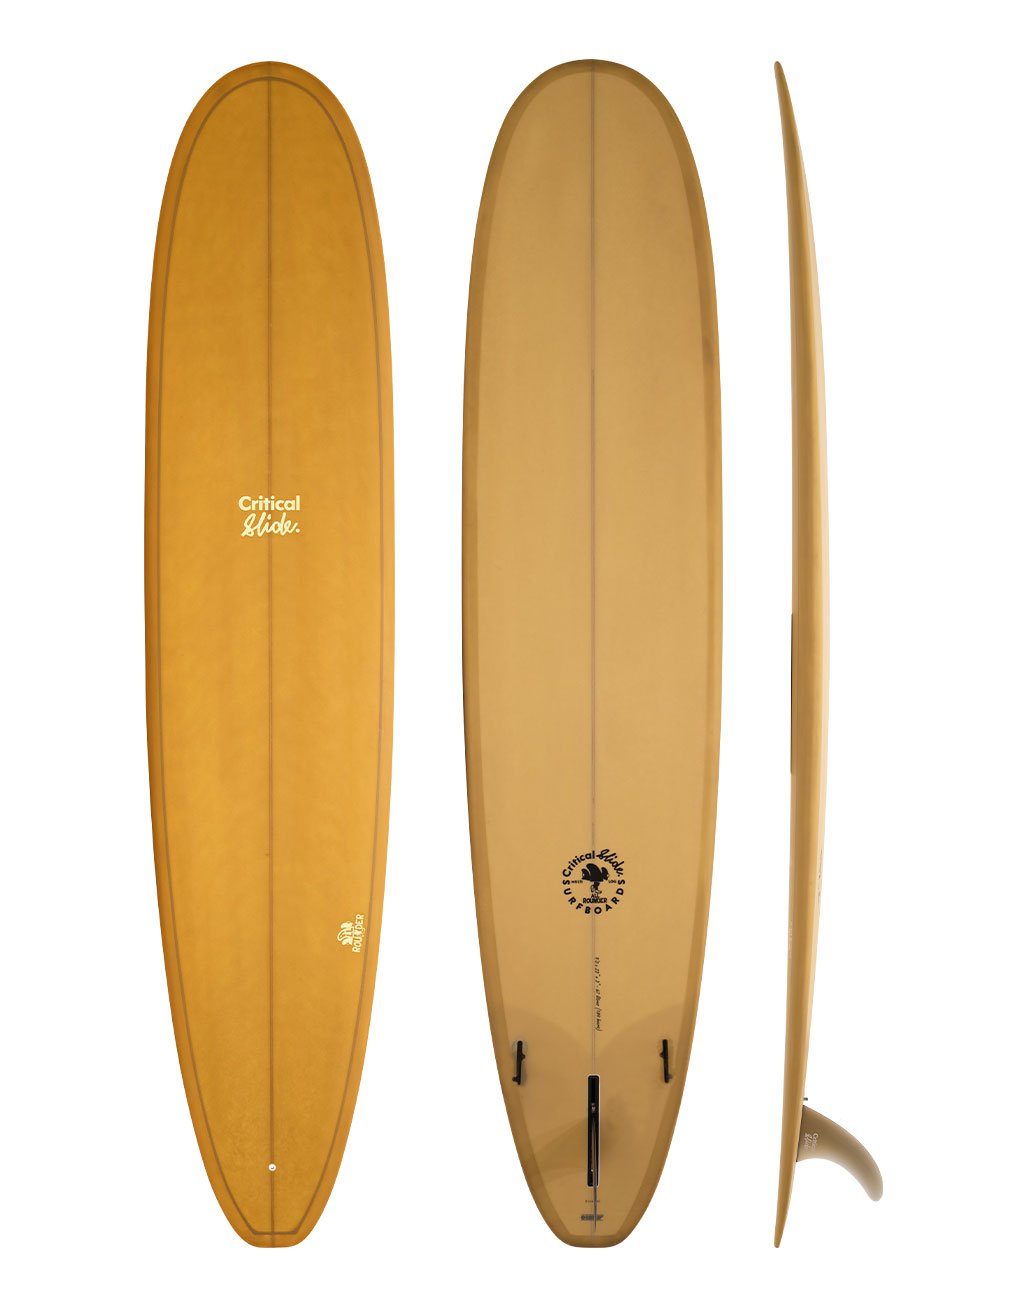 The Critical Slide Society Surfboards – Global Surf Industries - USA